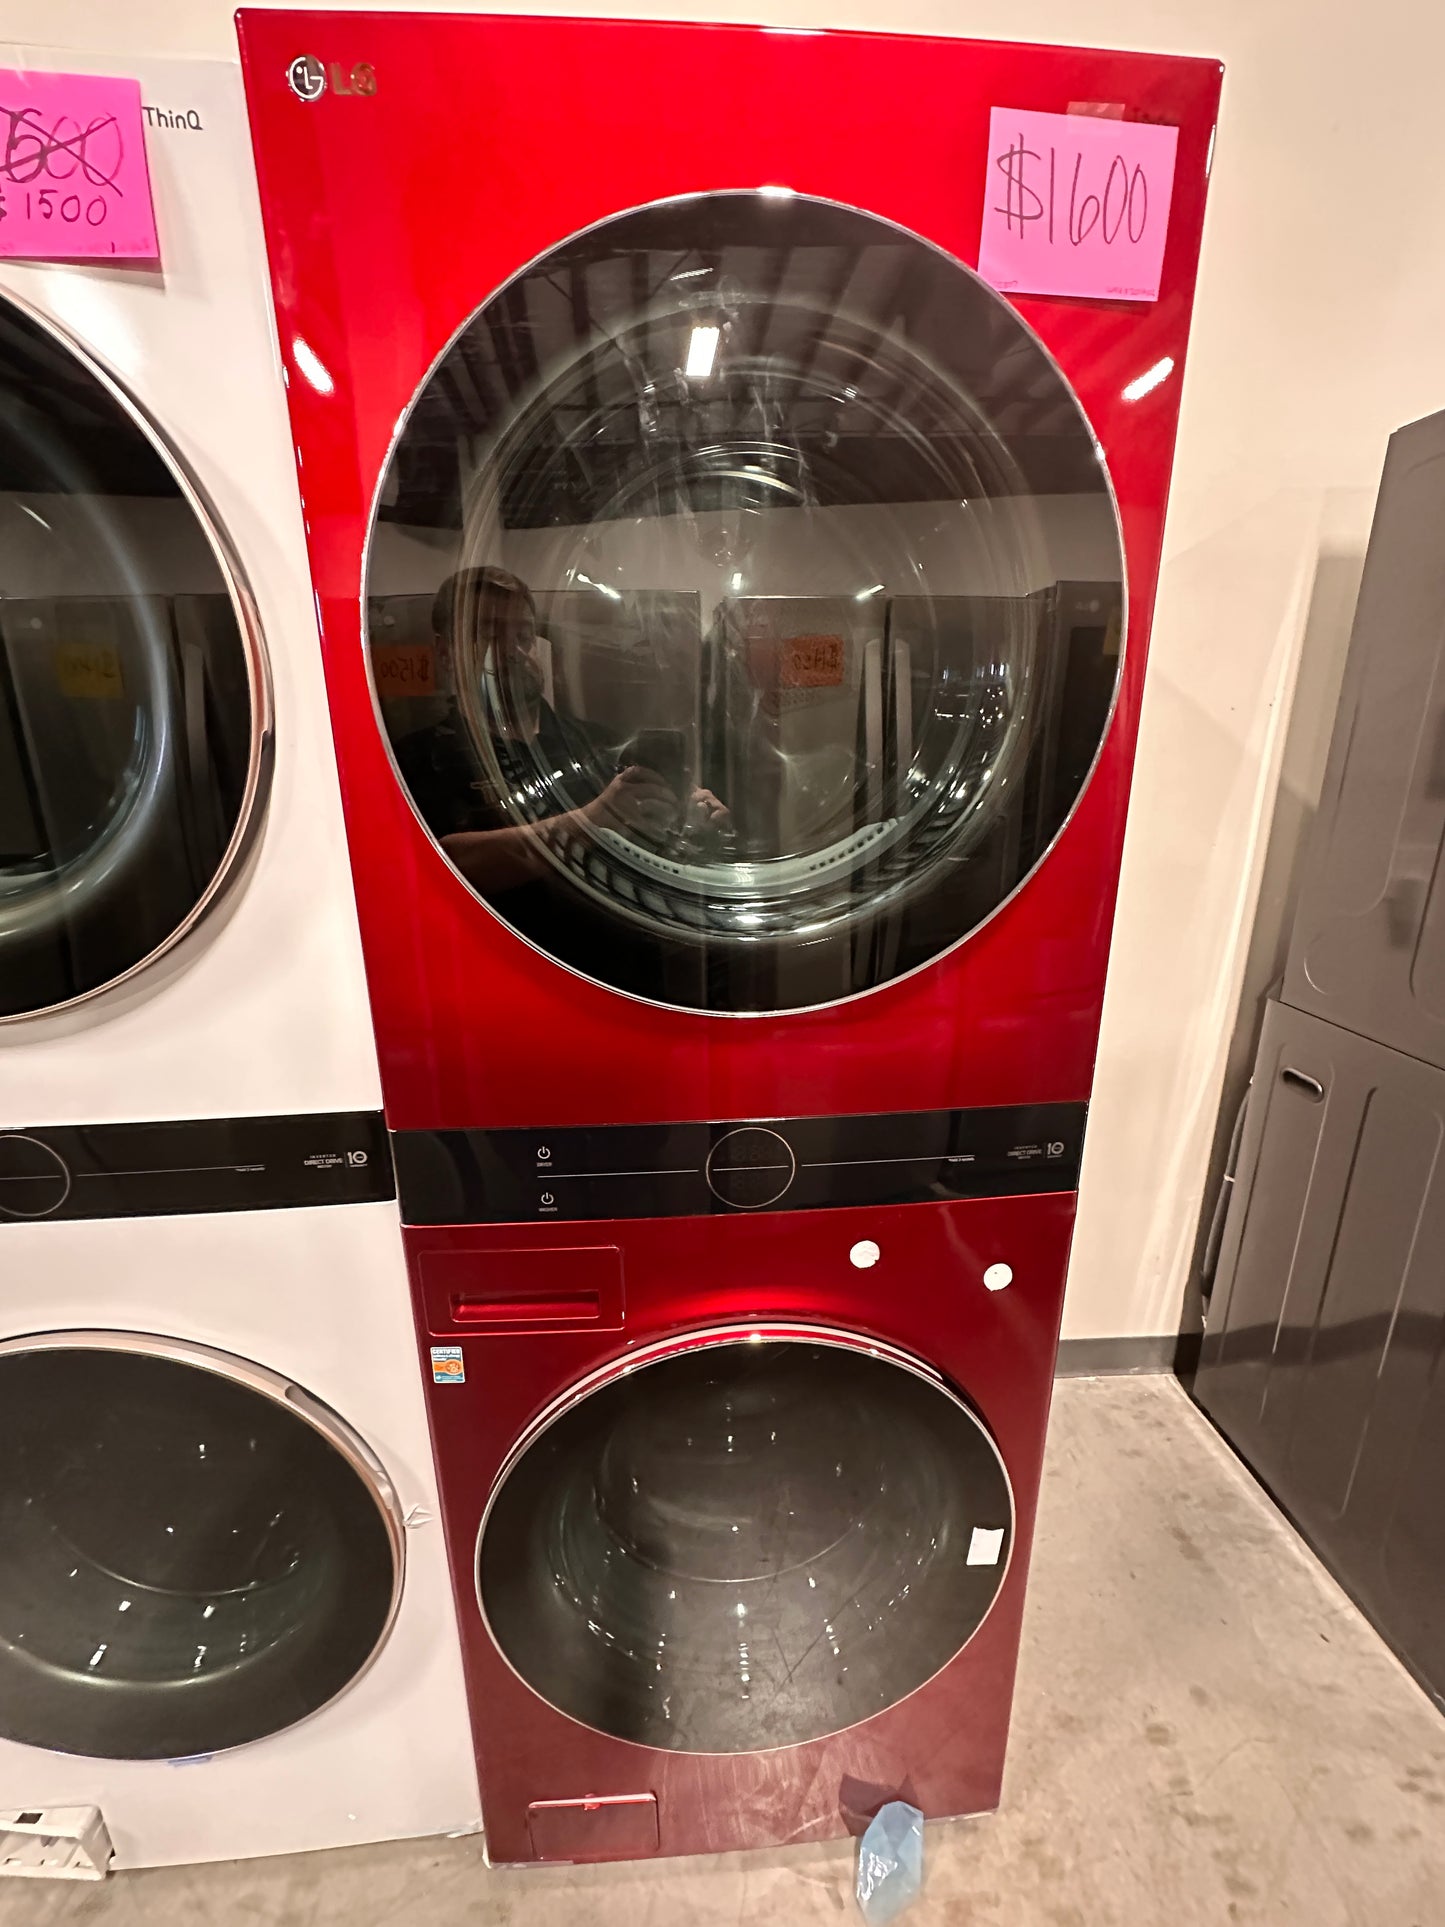 CANDY APPLE RED SMART WASHER ELECTRIC DRYER STACKED LAUNDRY SET - WAS12807 WKEX200HRA